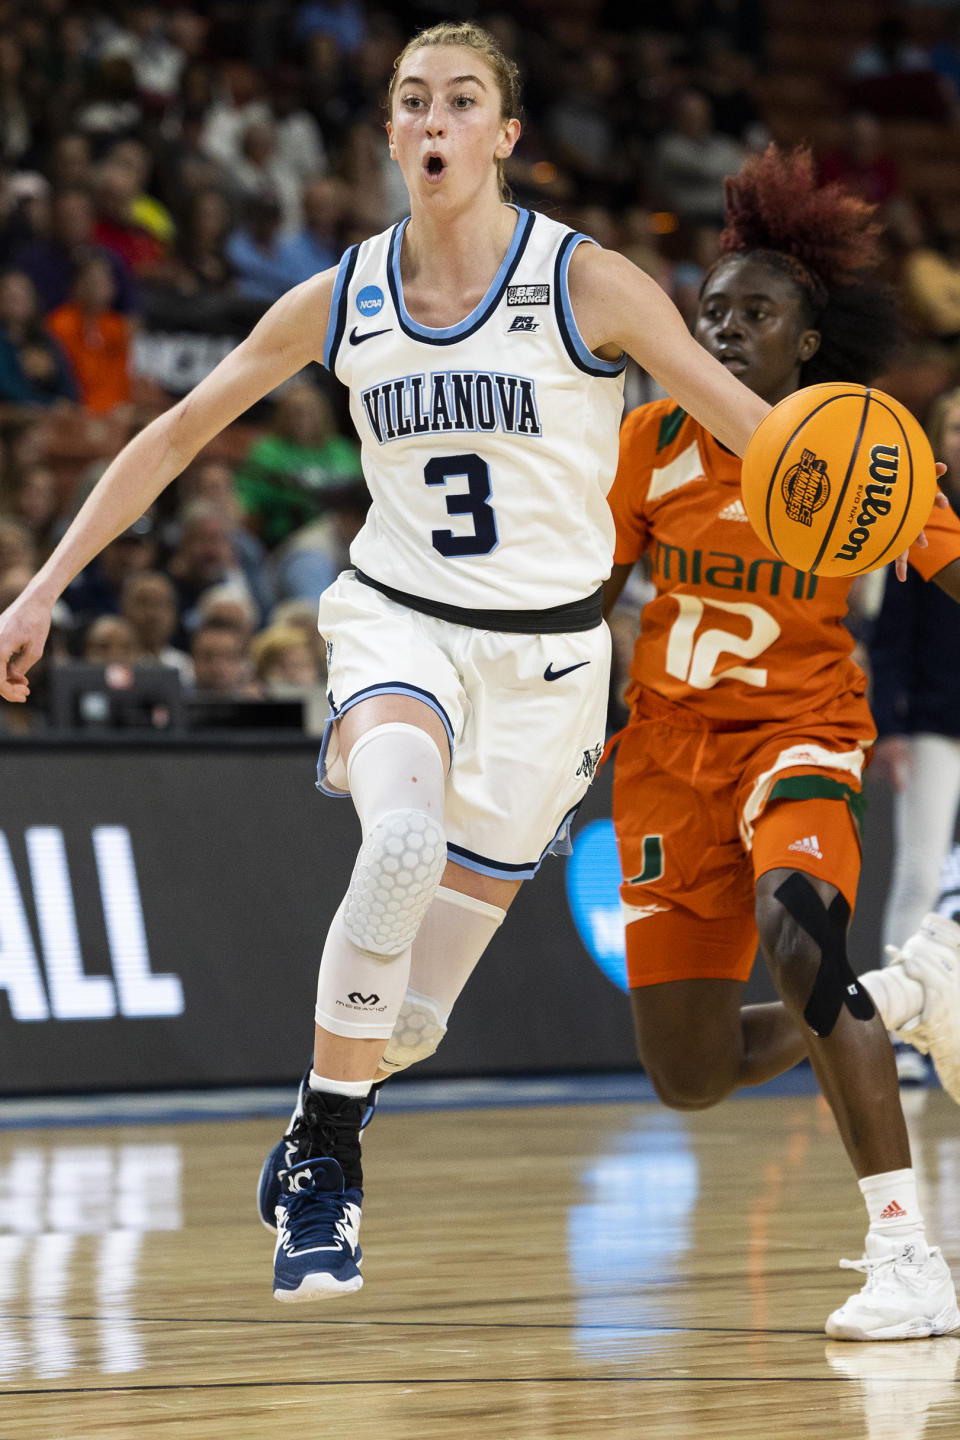 Villanova's Lucy Olsen (3) drives to the basket against Miami's Ja'Leah Williams (12) in the first half of a Sweet 16 college basketball game of the NCAA Tournament in Greenville, S.C., Friday, March 24, 2023. (AP Photo/Mic Smith)